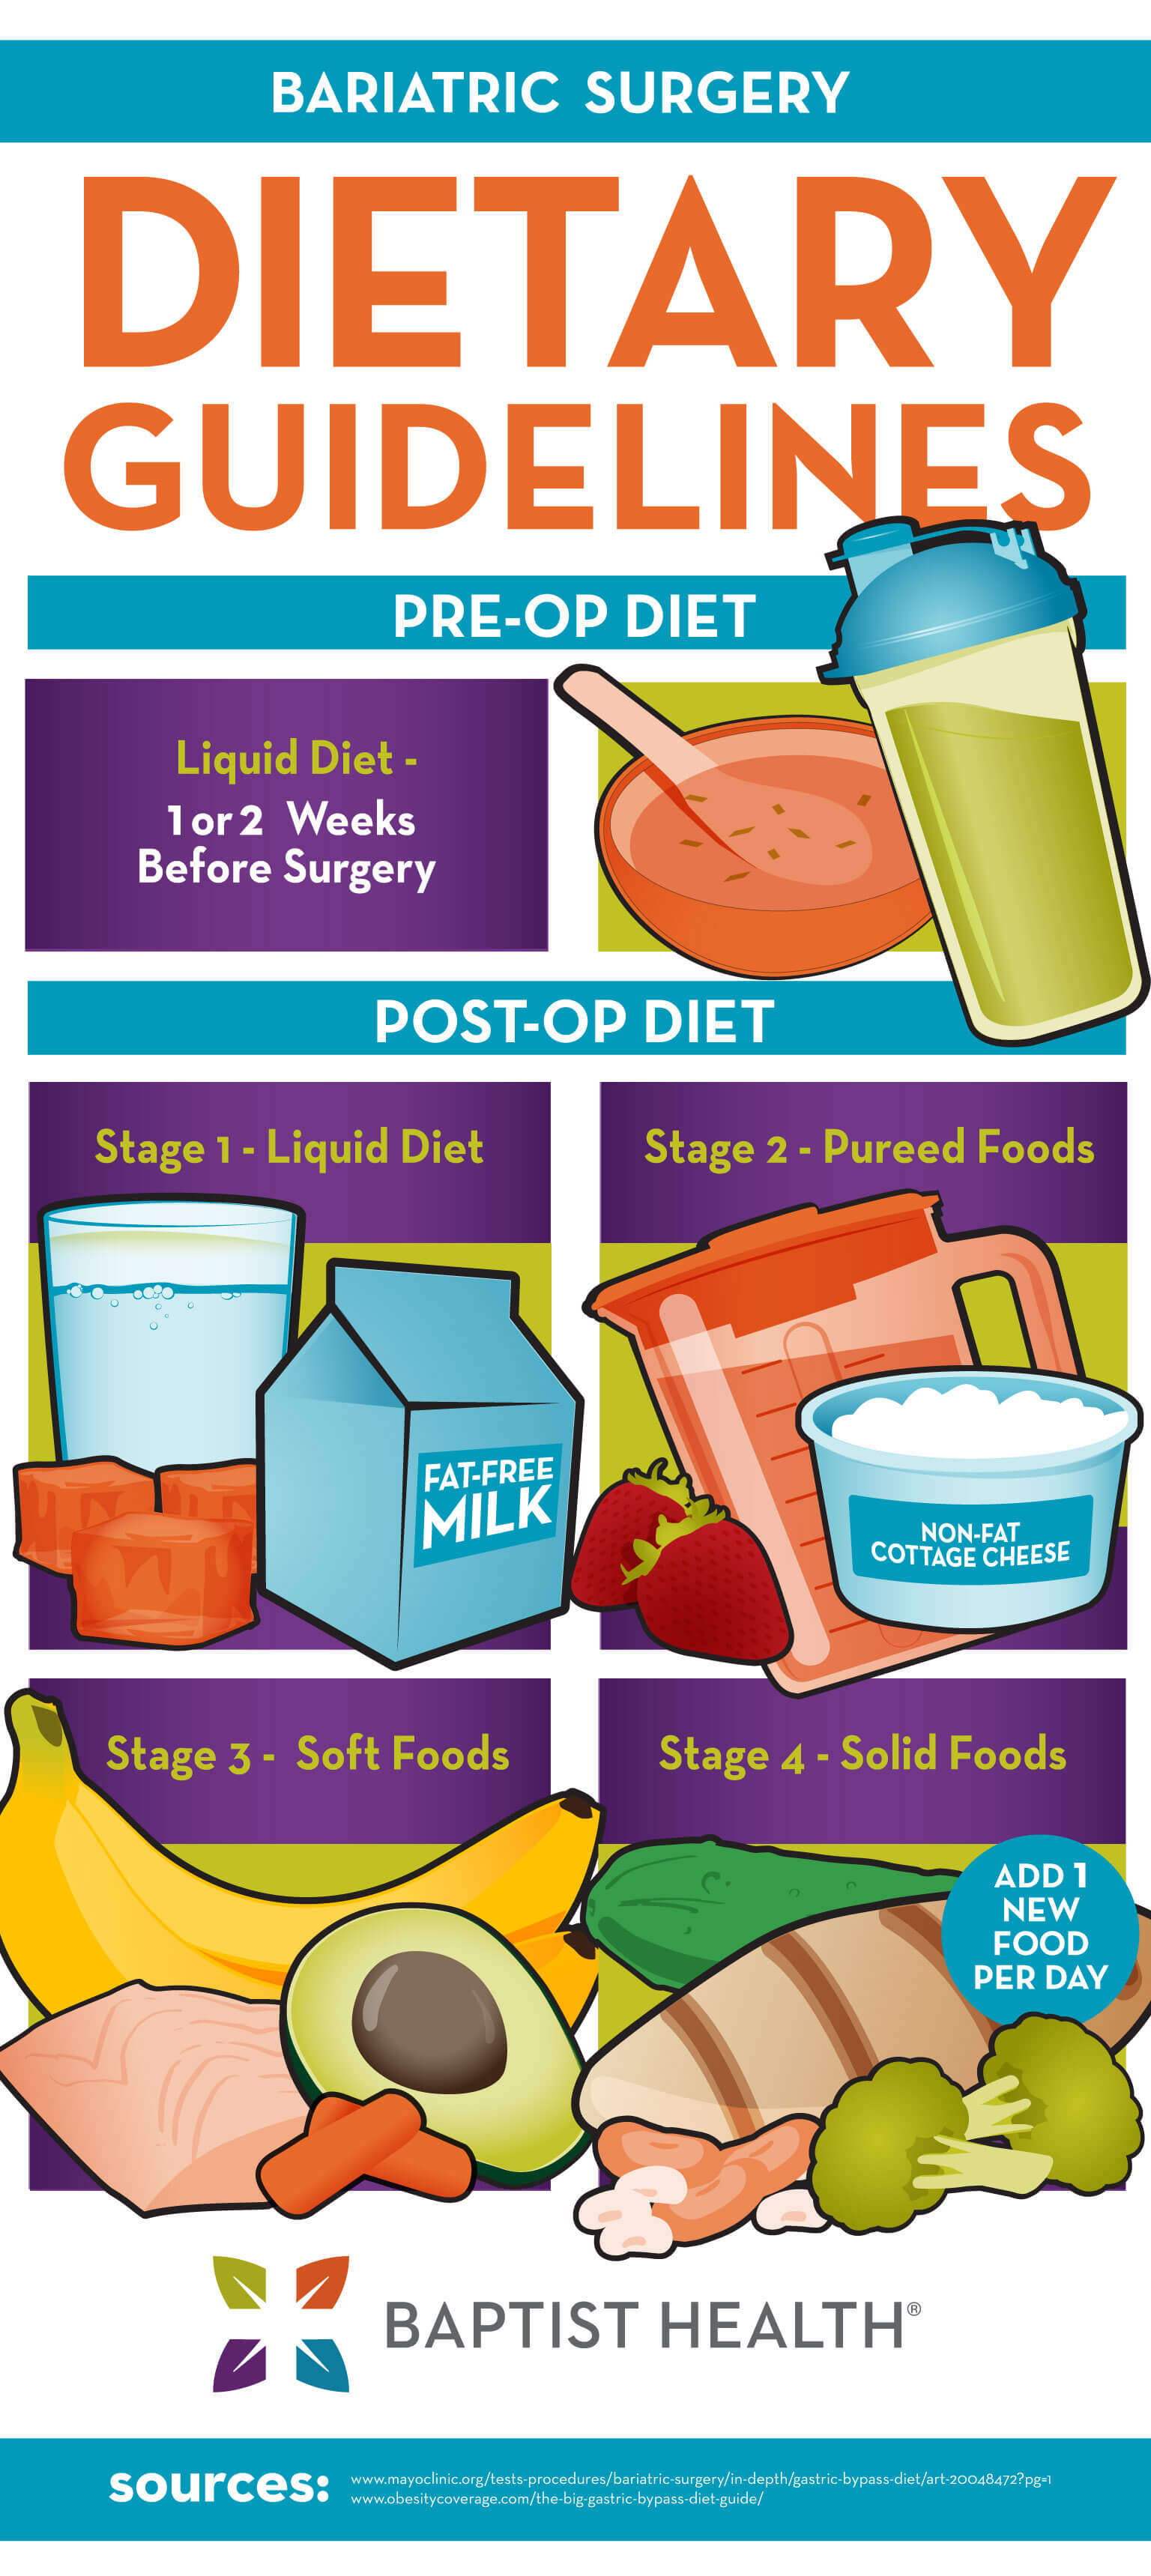 https://www.baptisthealth.com/-/media/images/migrated/blog-images/content-images/infographic-bariatric-diet.jpg?rev=211af9a593f341afbf0e854a48da4e22&hash=51F8D5A66B61115E47EB21865913C2C9